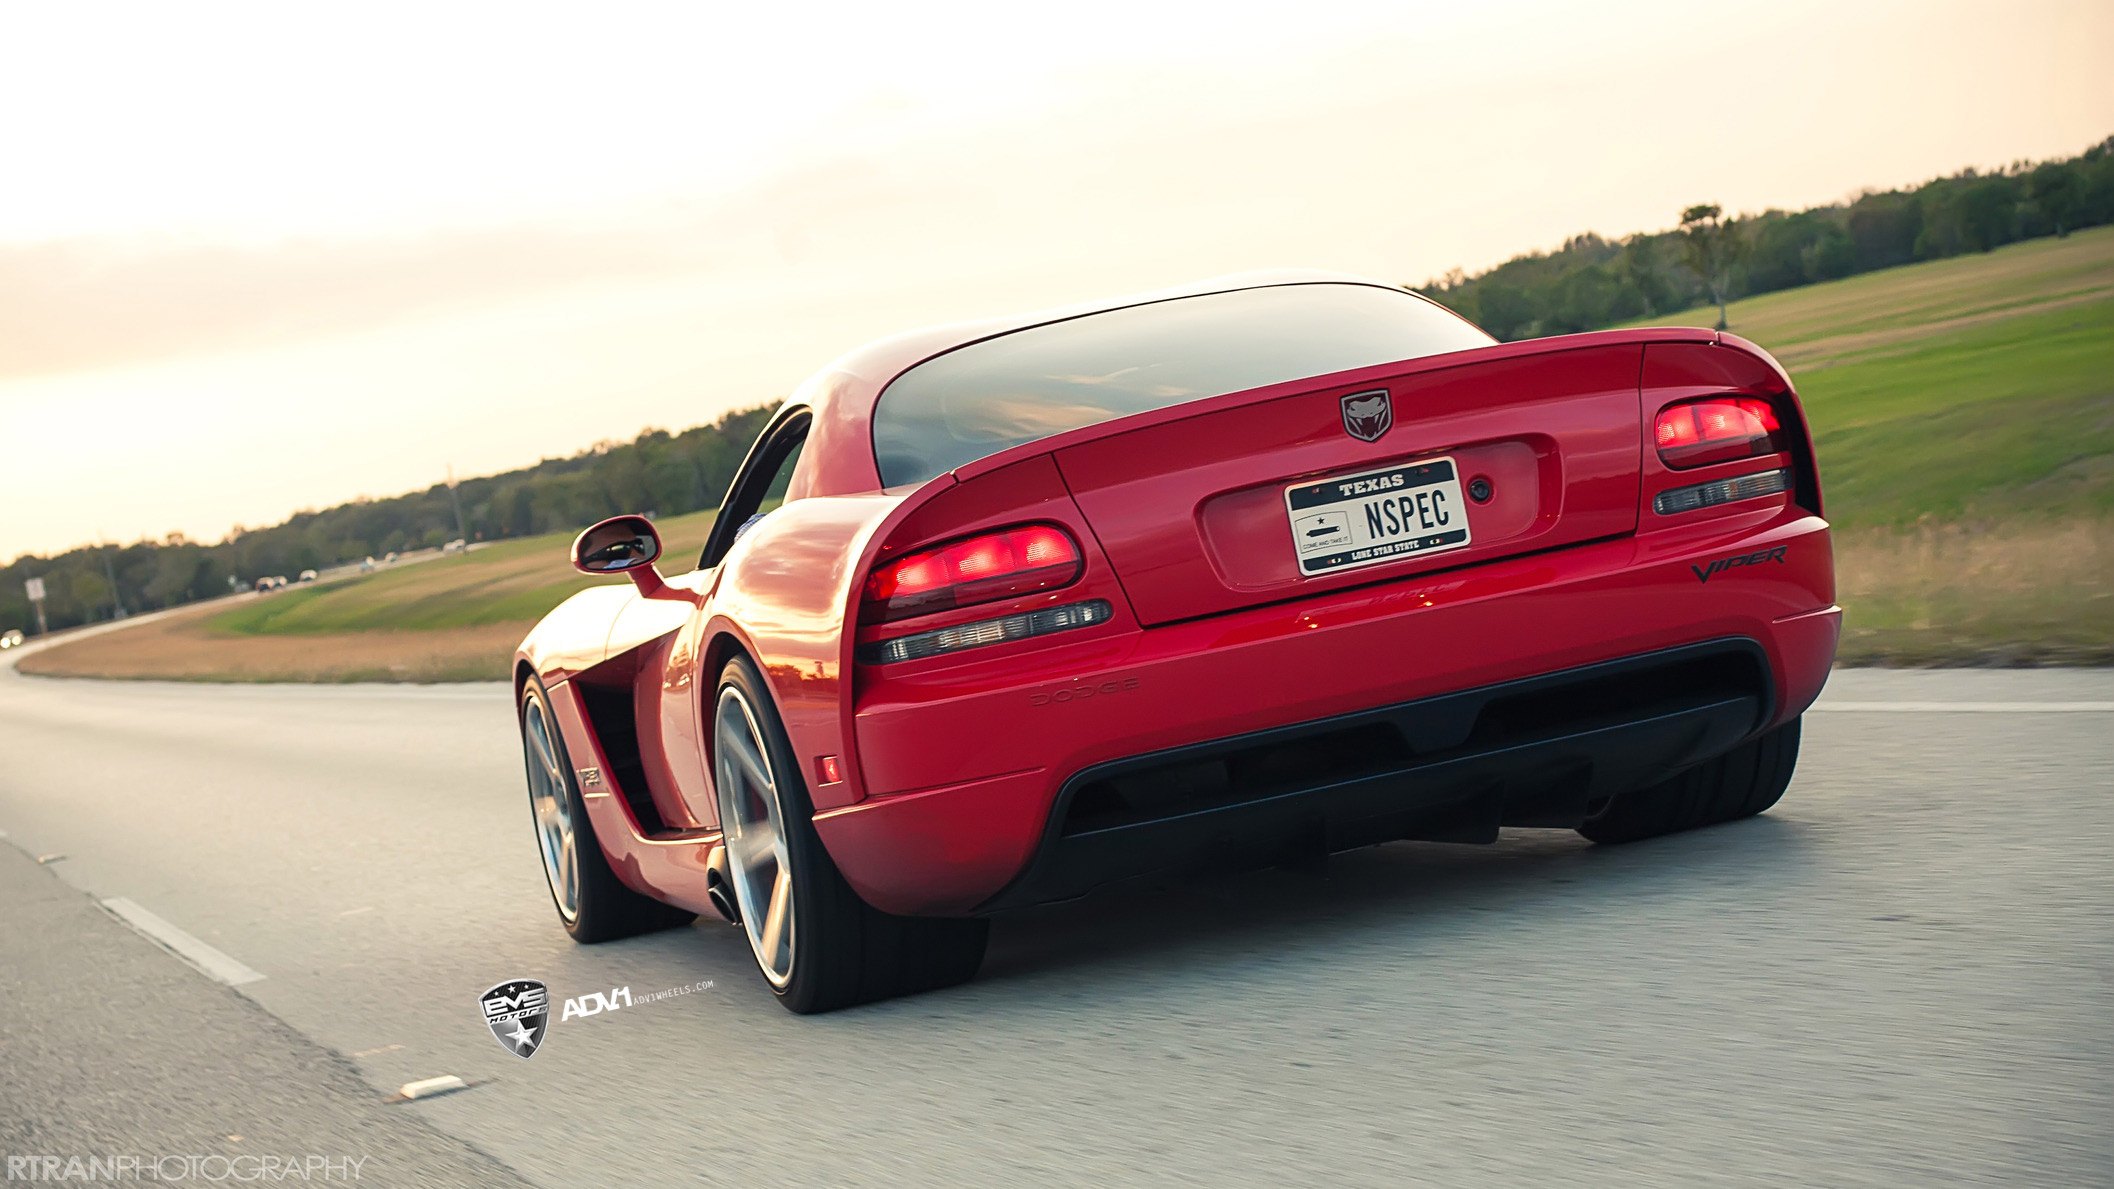 Aftermarket Rear Diffuser on Red Dodge Viper - Photo by ADV.1